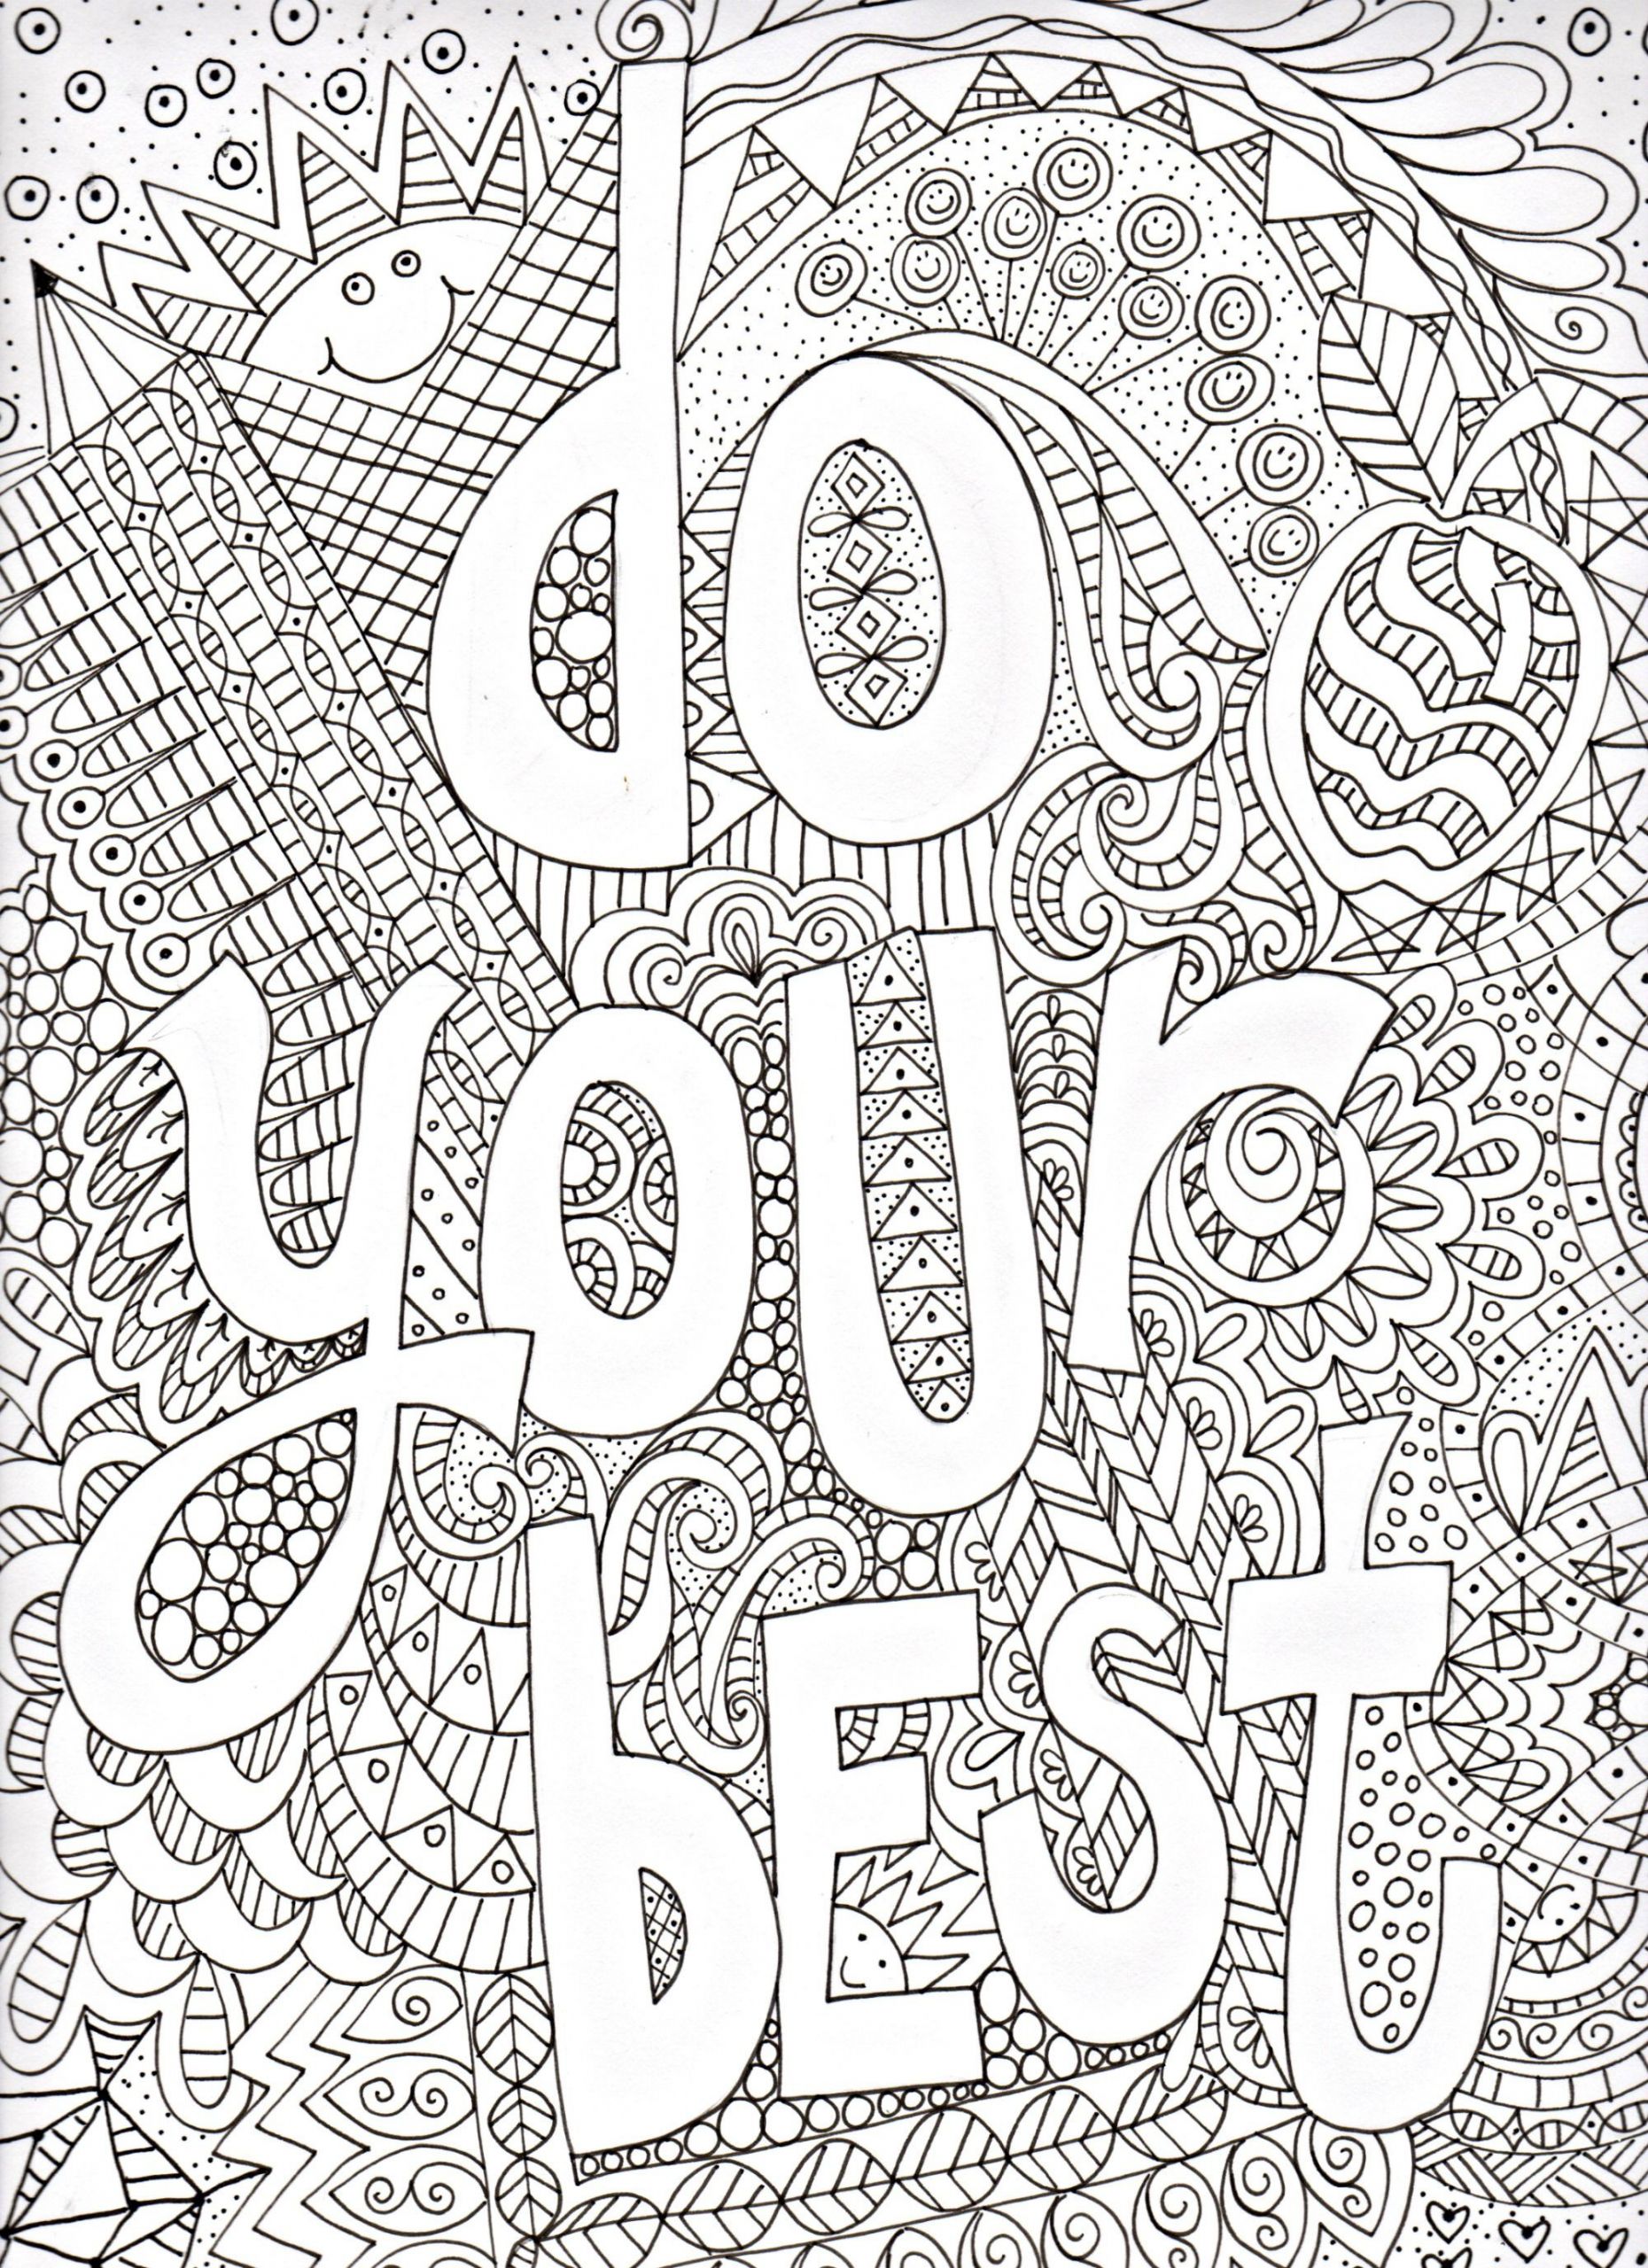 Funny Coloring Pages For Adults
 Get out those colored pencils and have some doodle fun